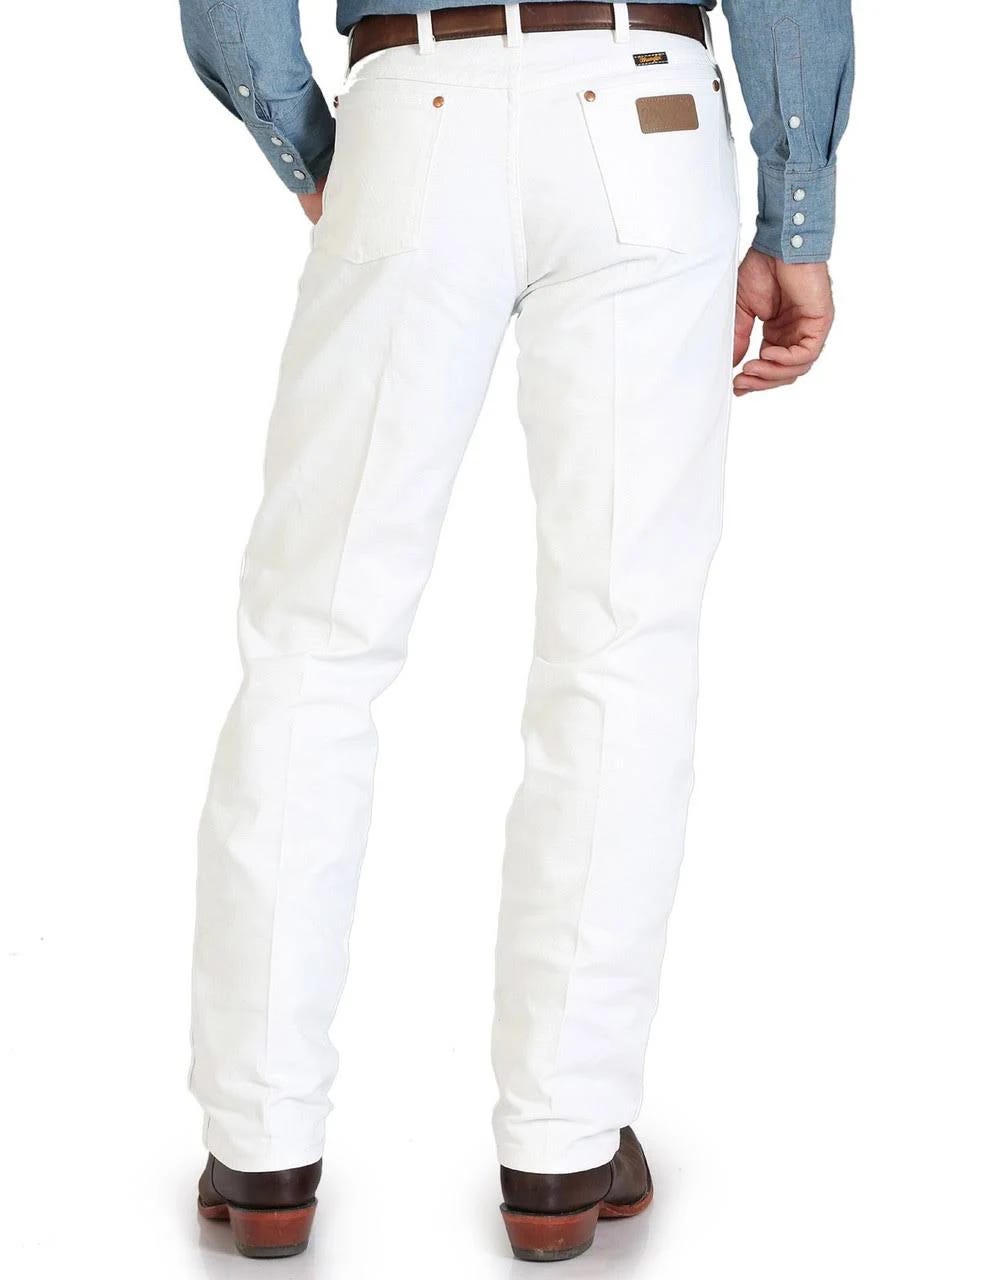 Affordable White Jeans for Cowboys: High-Quality, Comfortable Fit | Image